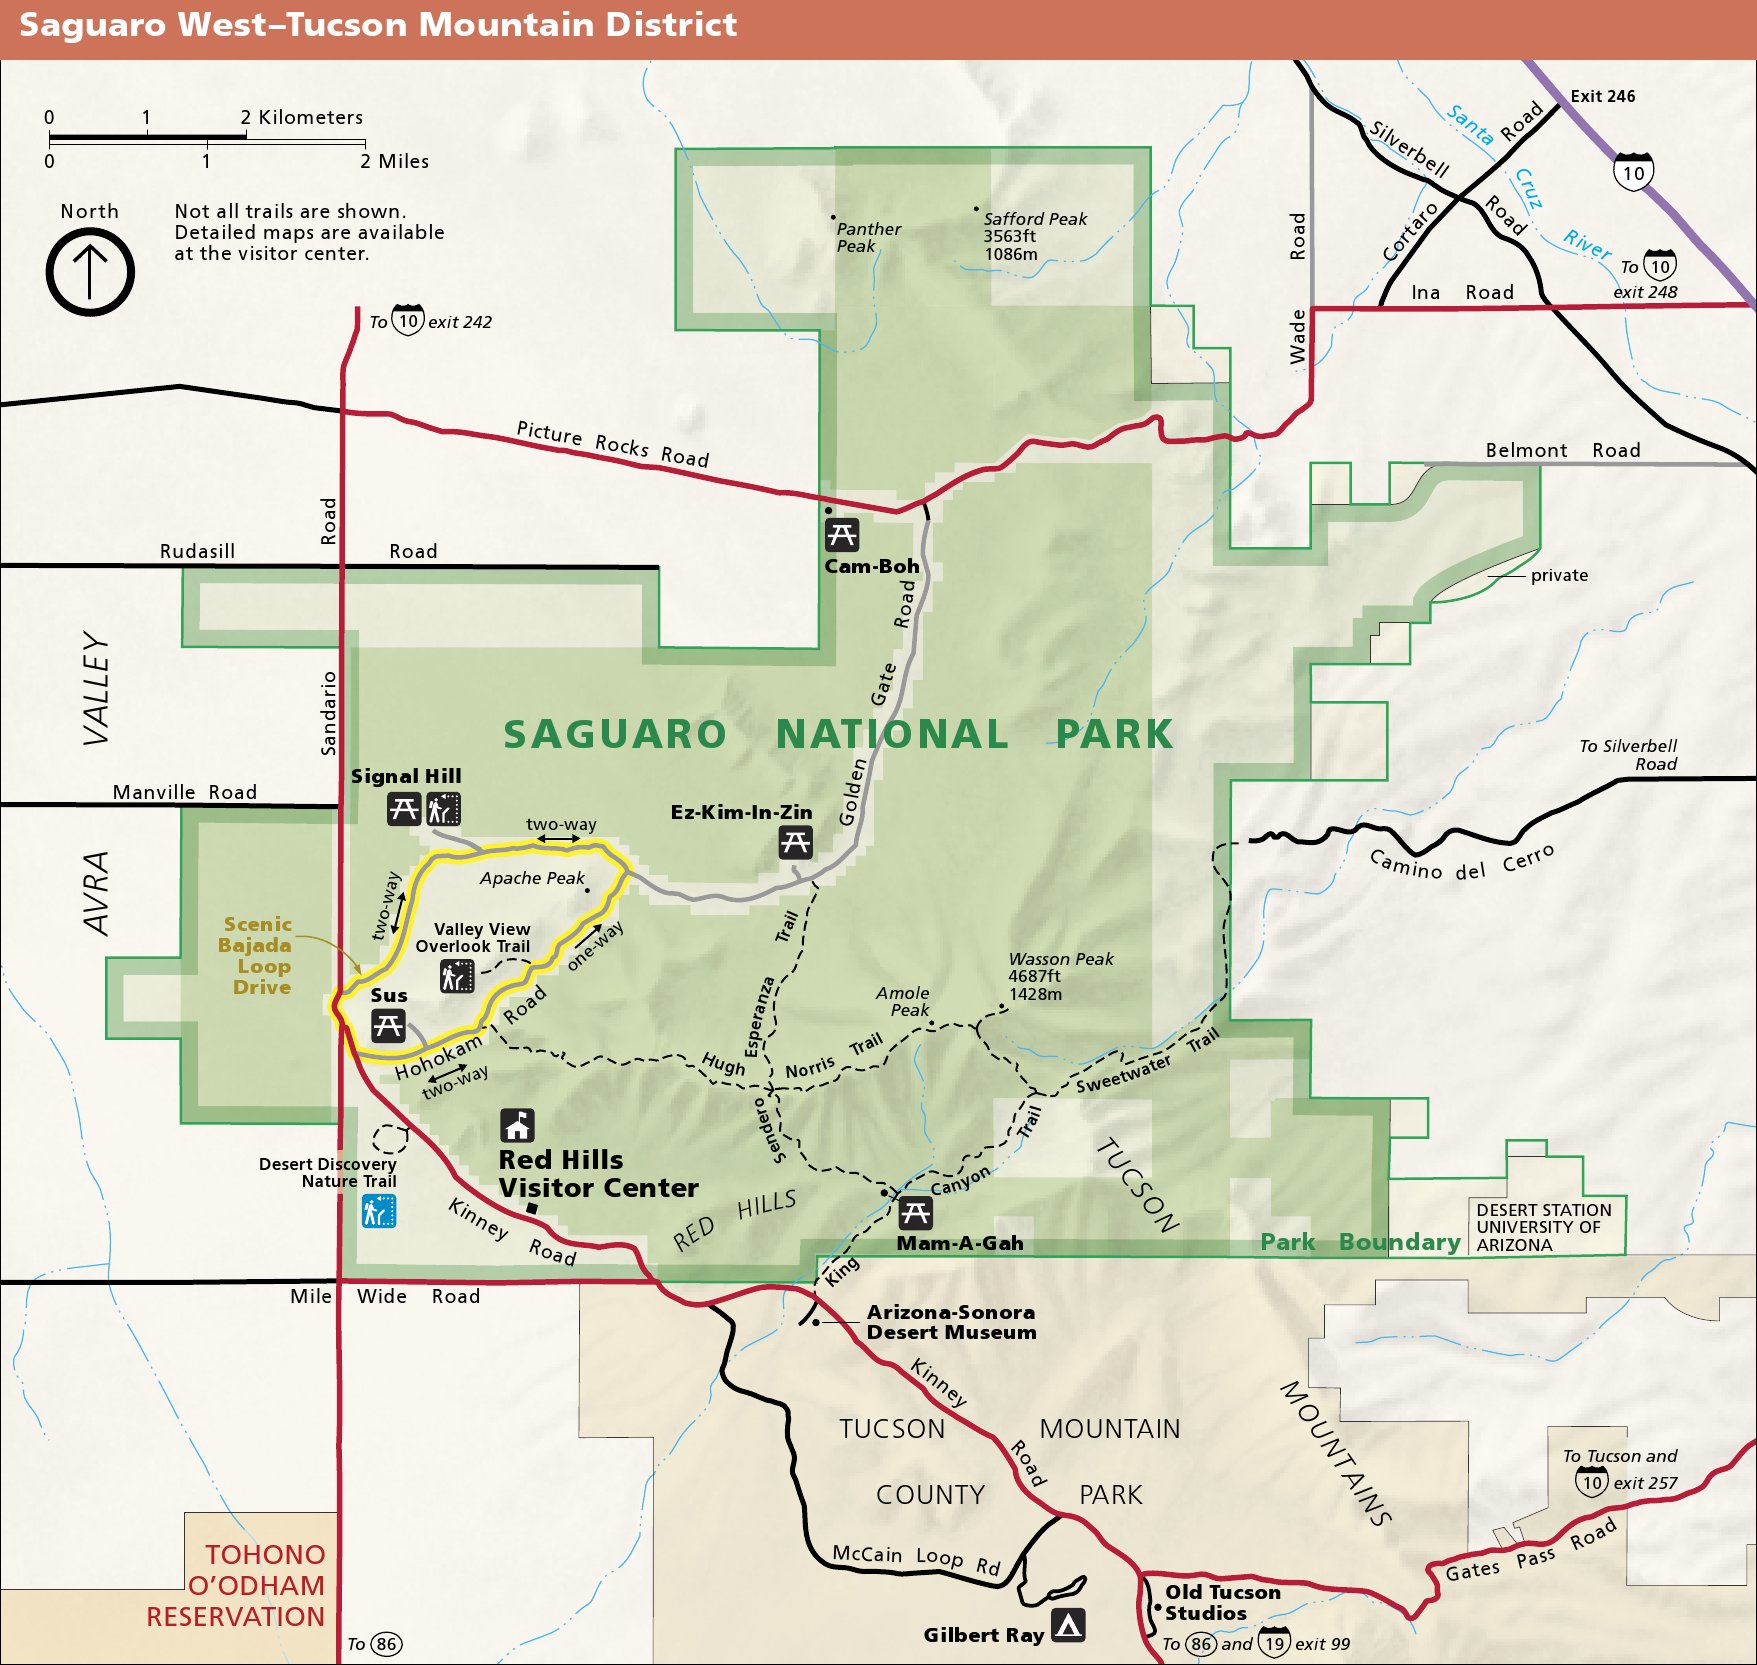 Map of the Tuscon Mountain district (Saguaro National Park West).